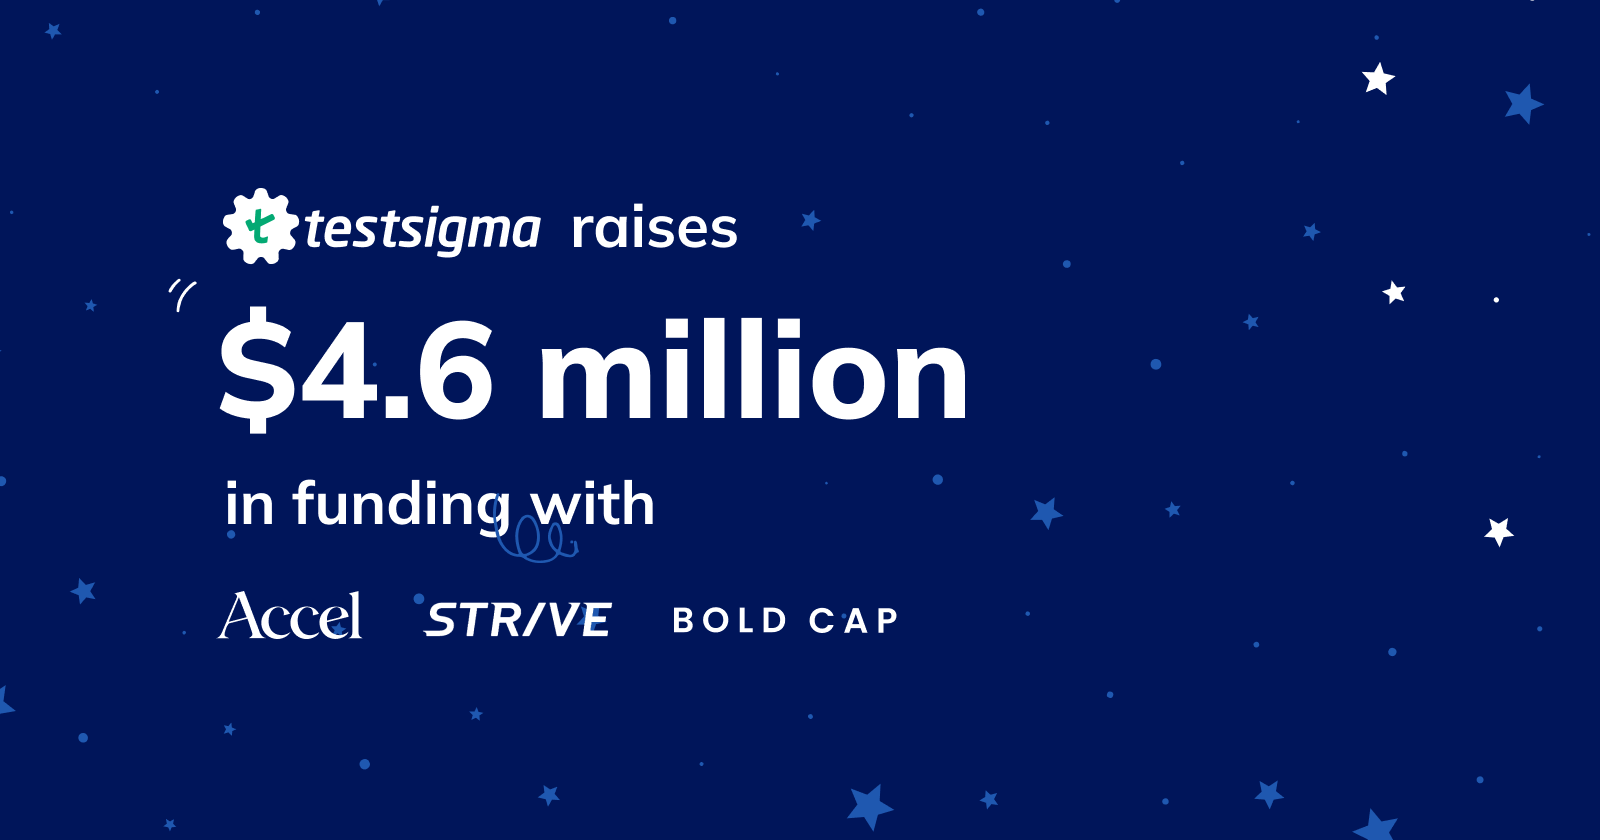 Testsigma raises $4.6M from Accel and STRIVE to simplify test automation